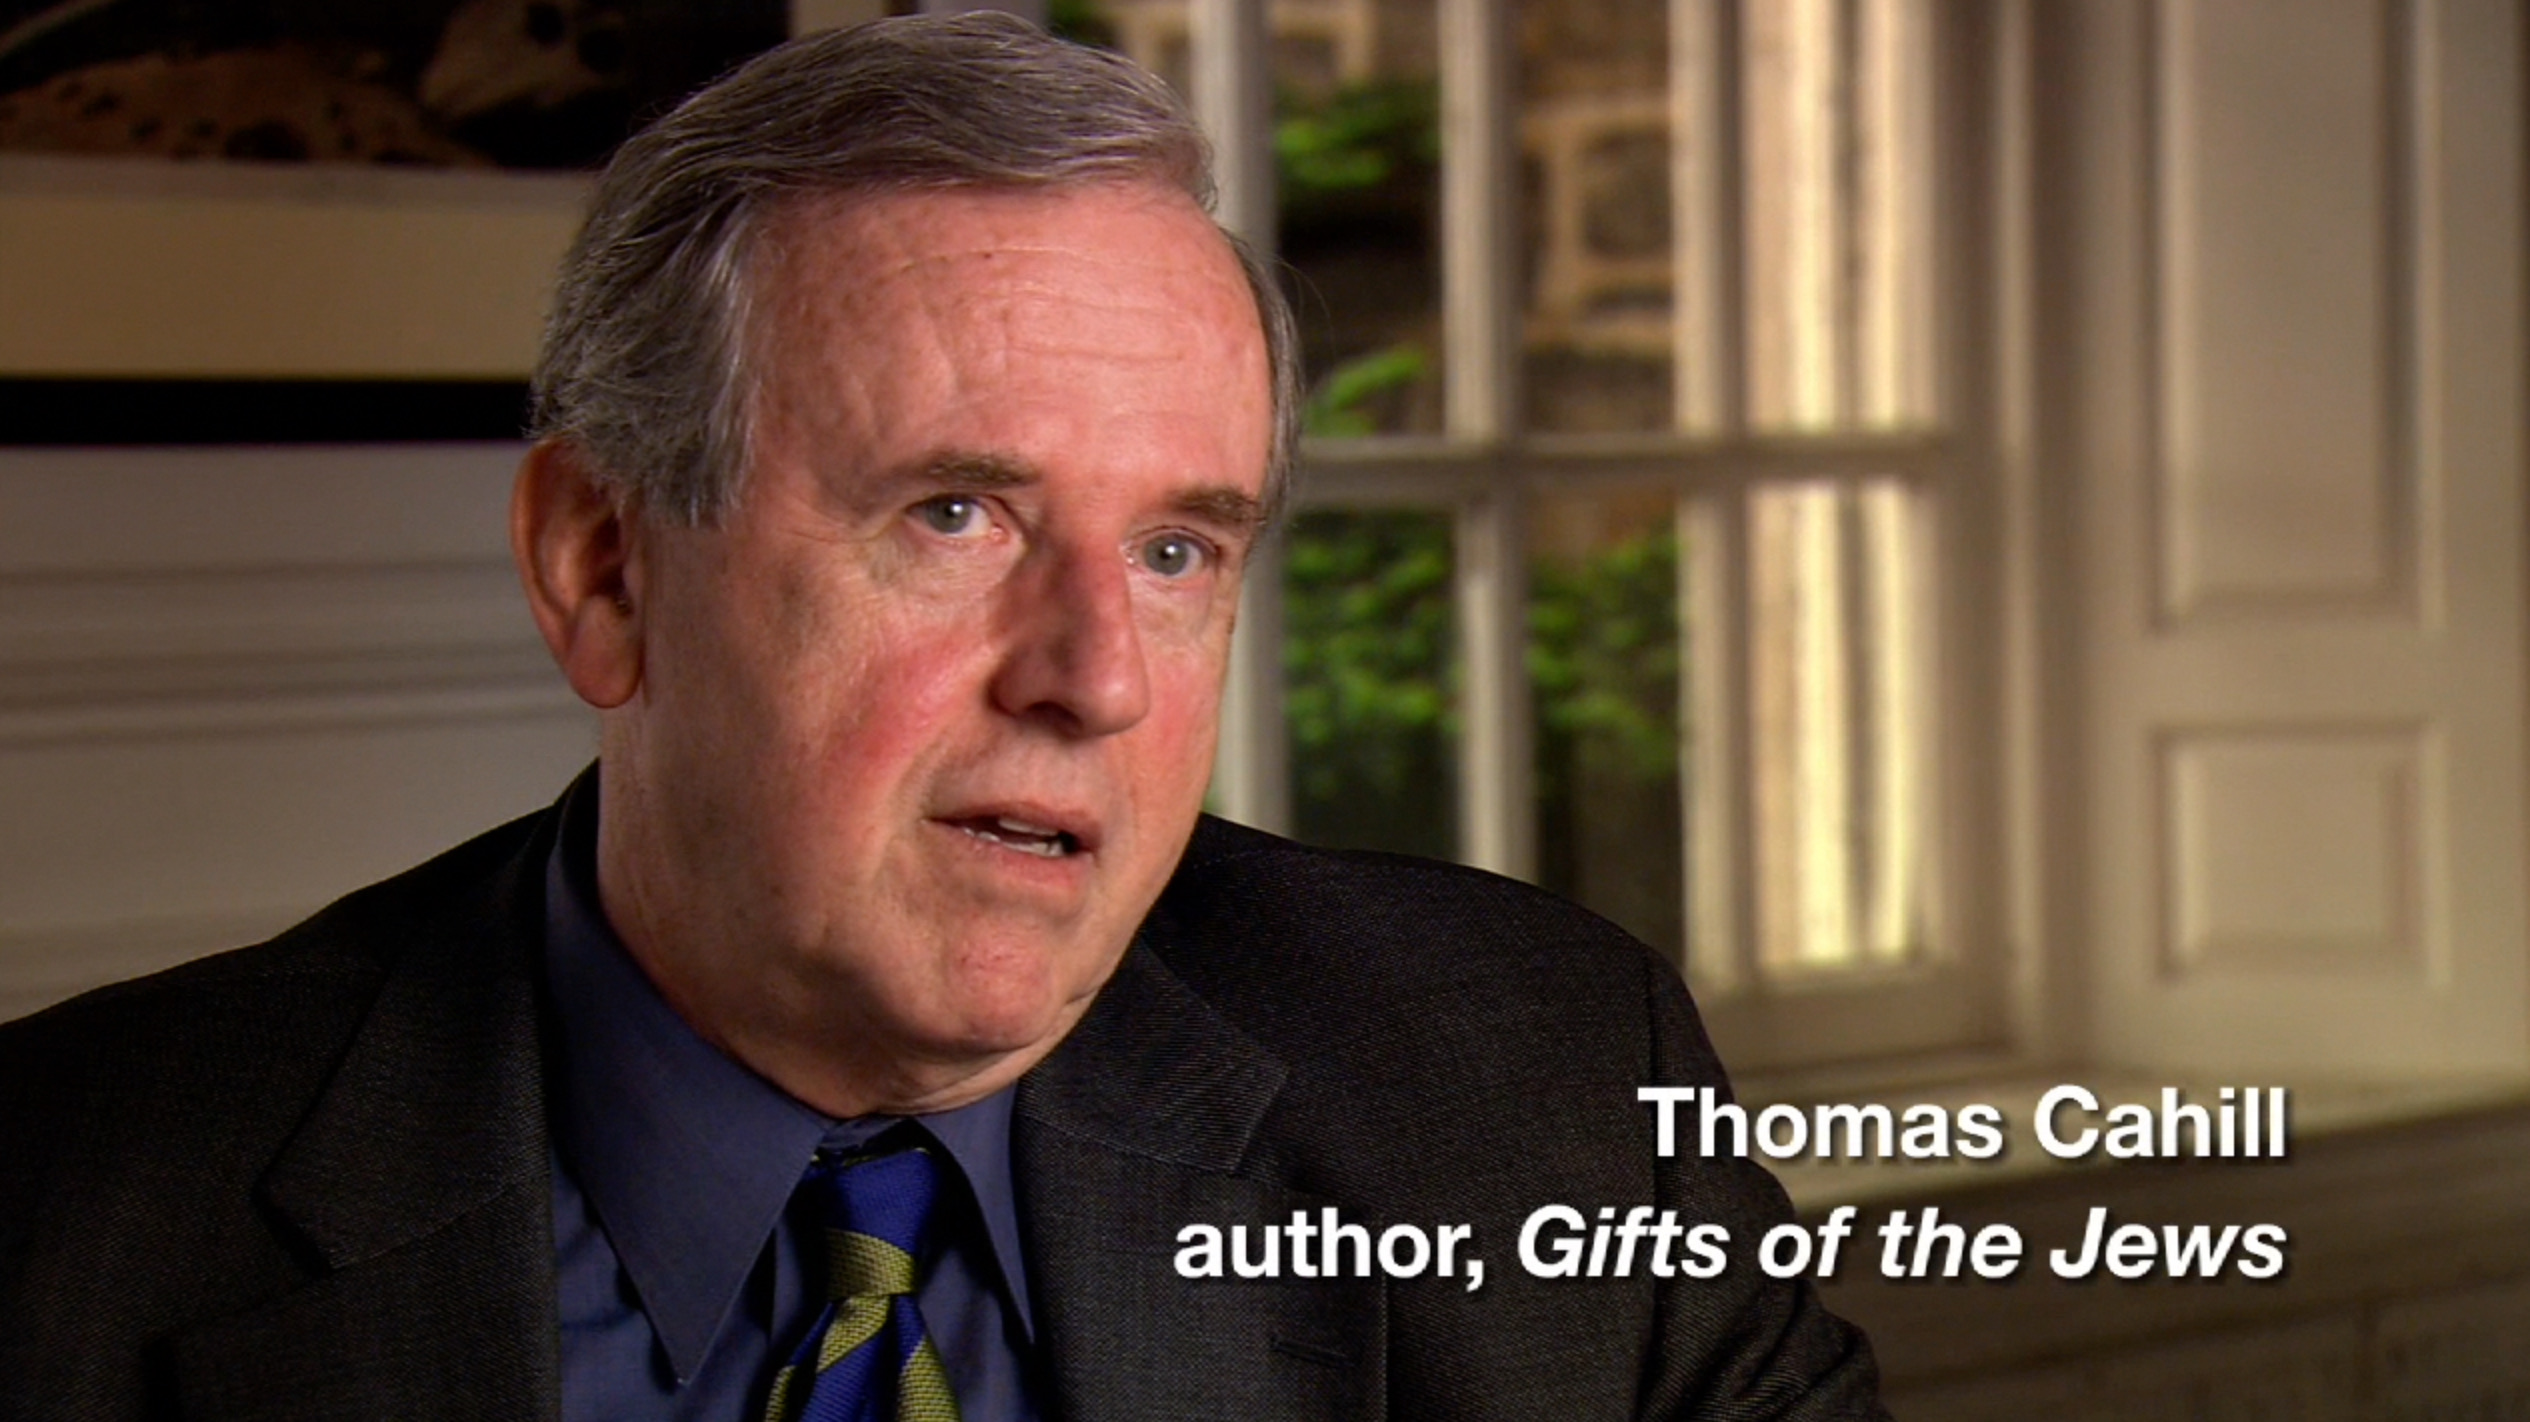 Thomas Cahill Gifts of the Jews